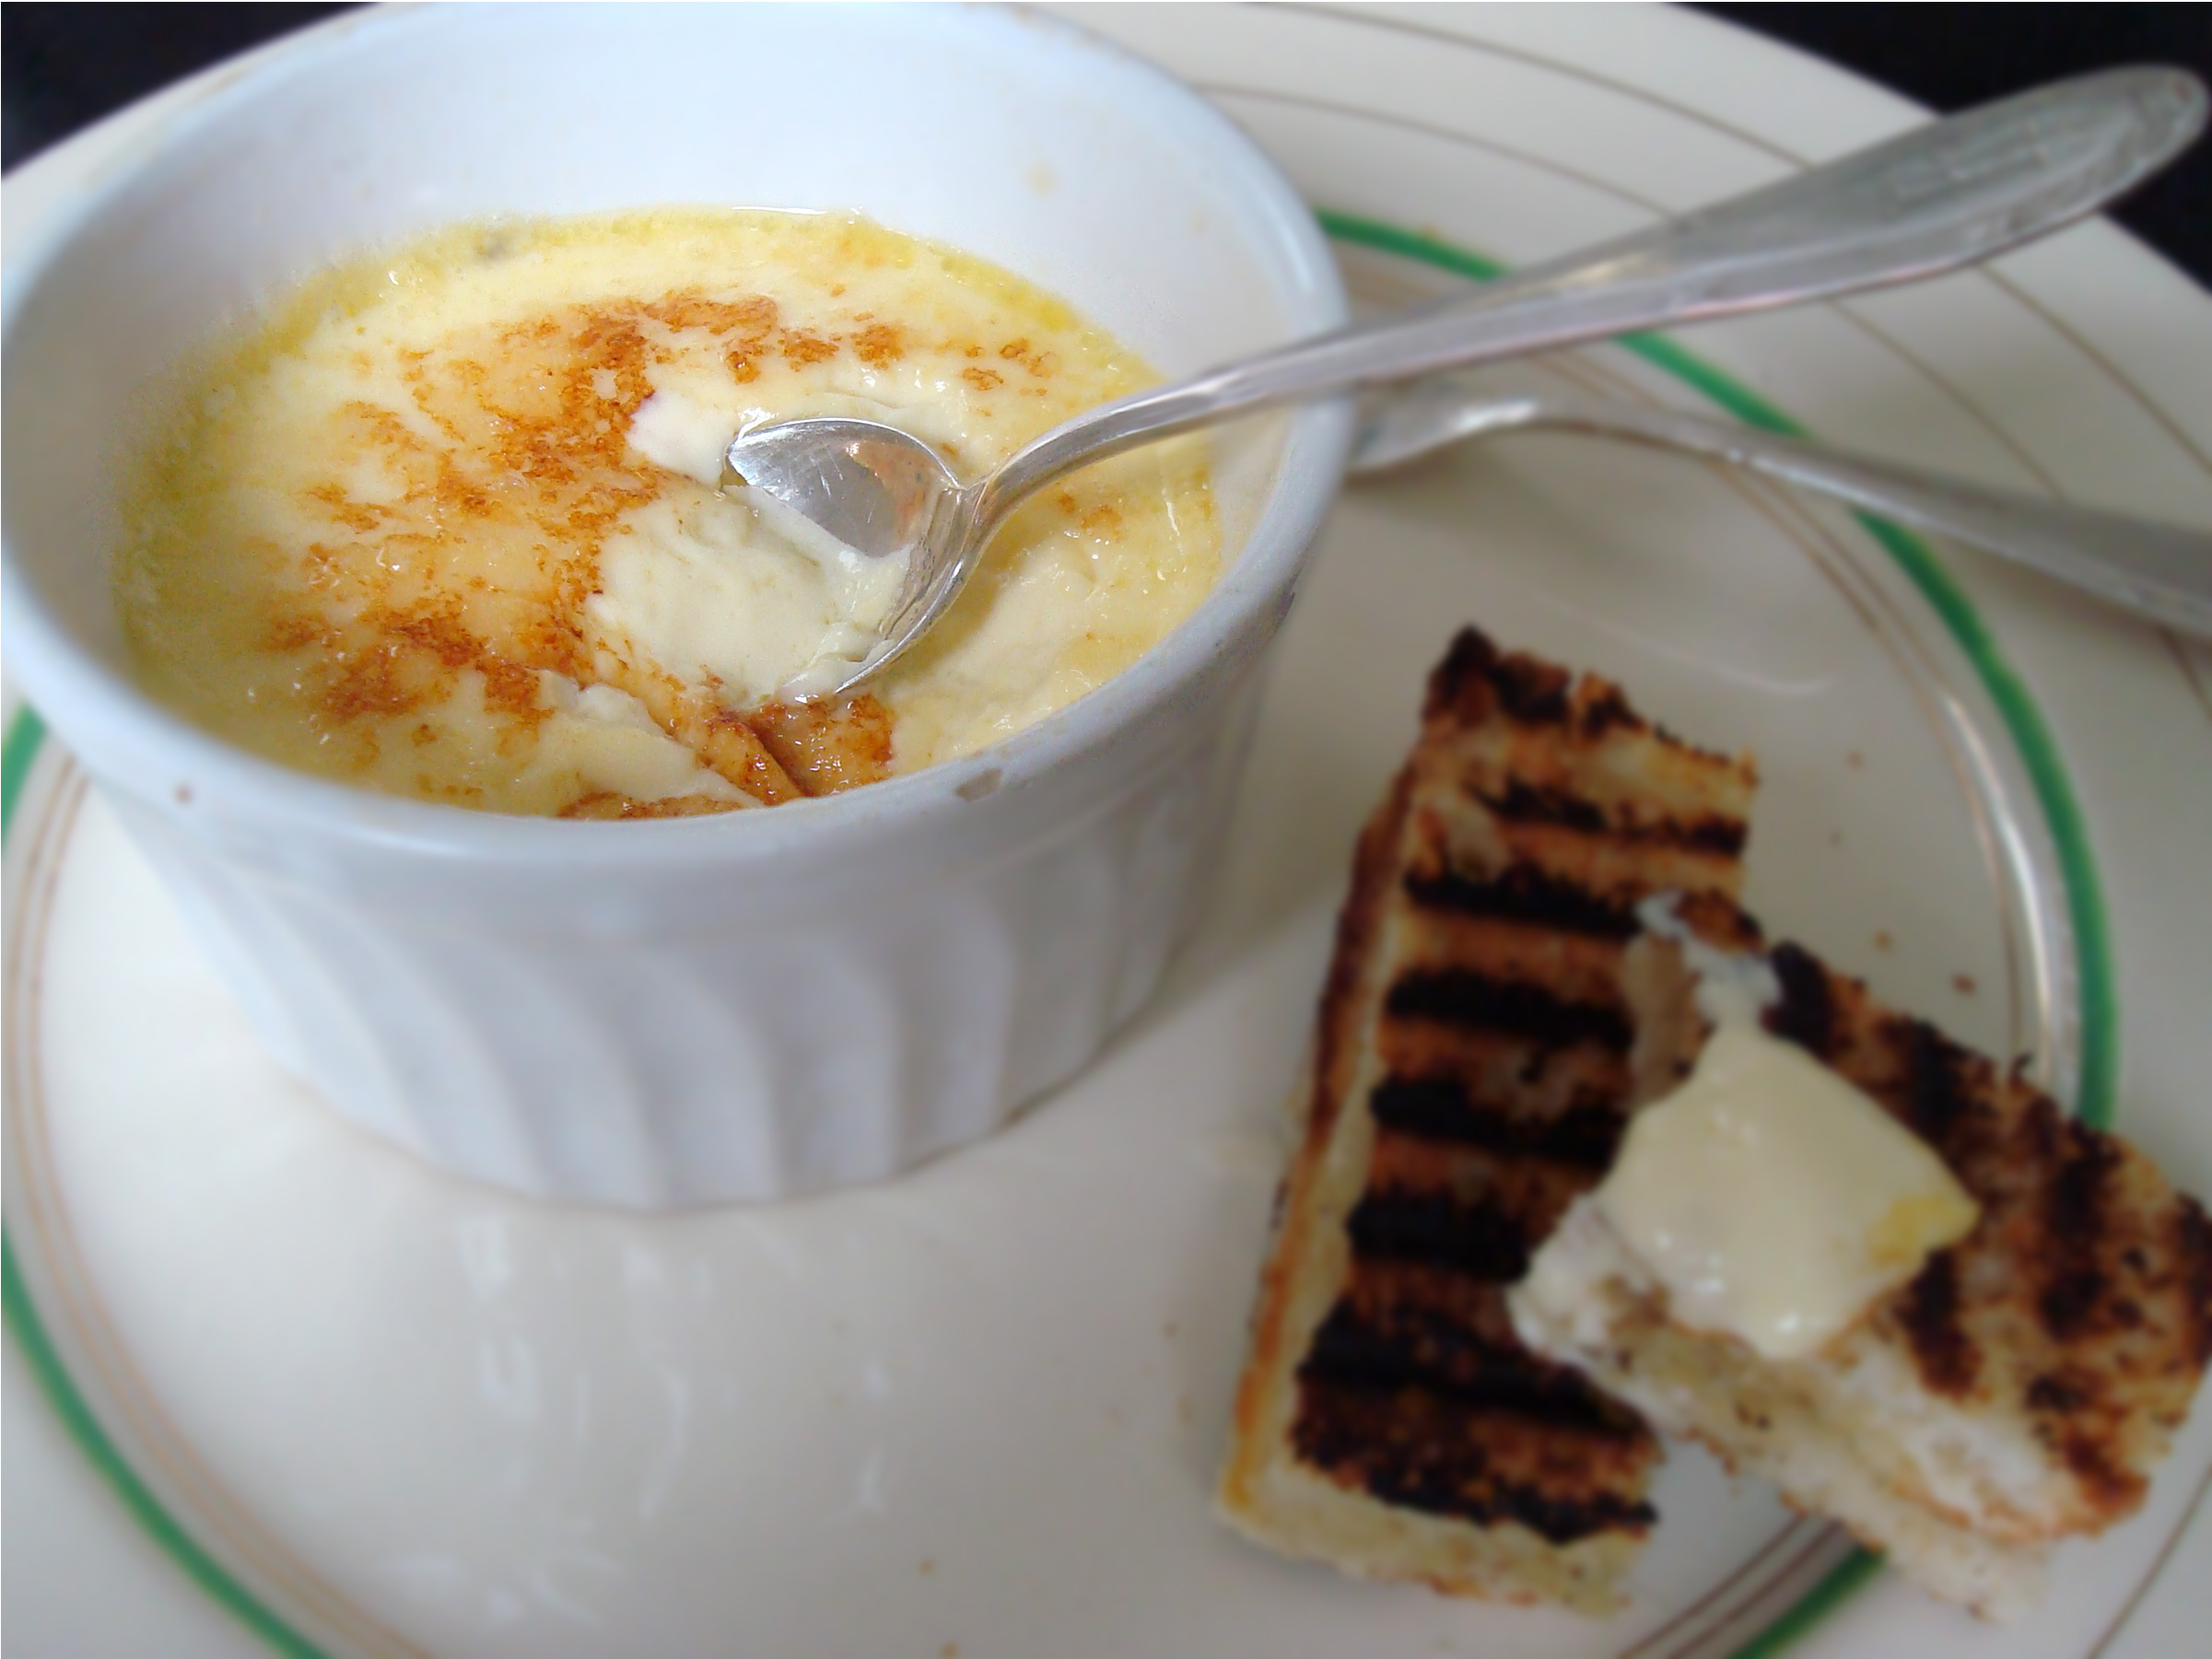 Parmesan custard and anchovy toast